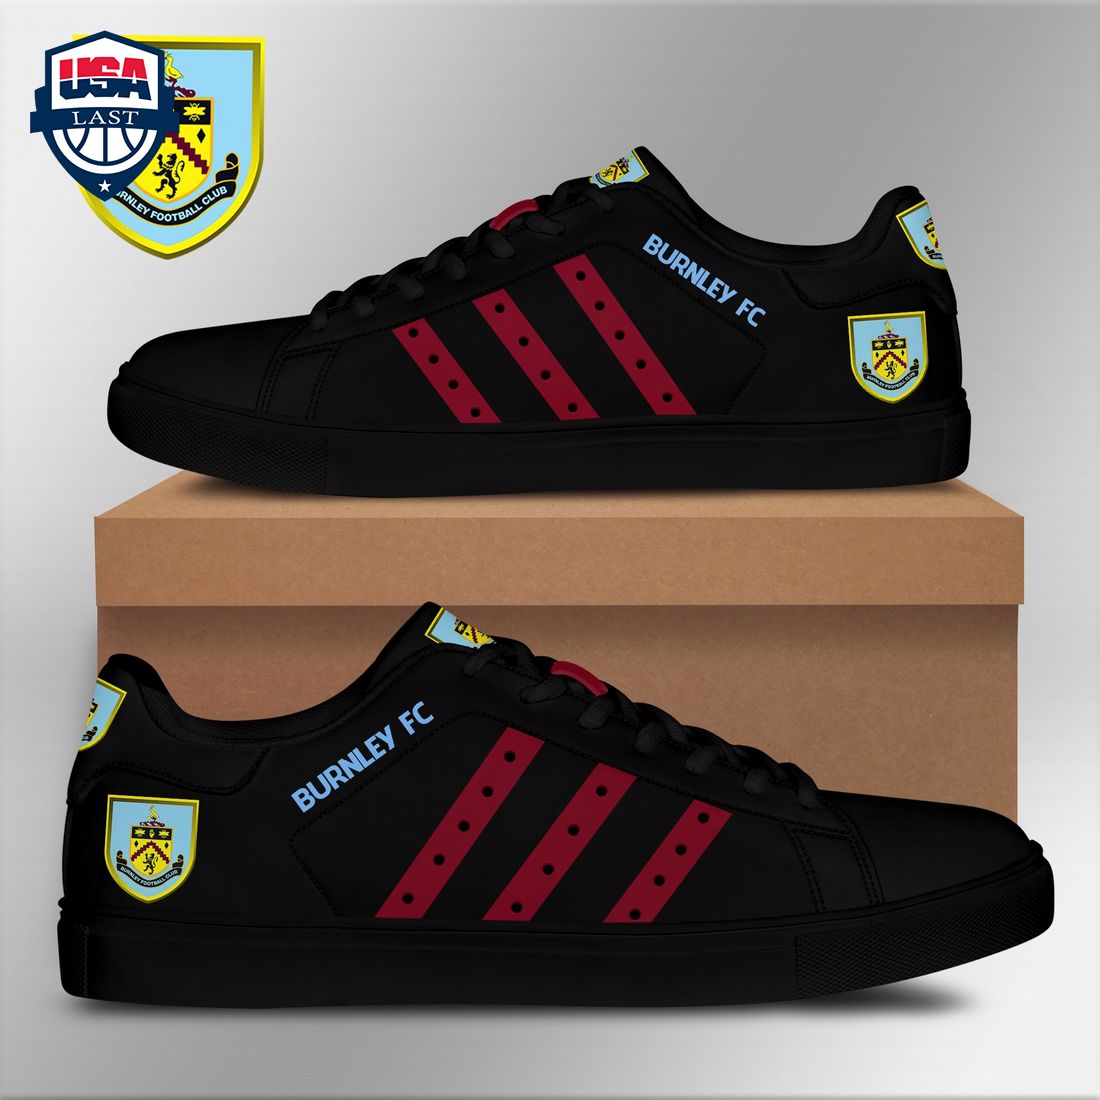 burnley-fc-red-stripes-style-2-stan-smith-low-top-shoes-1-VHbvo.jpg